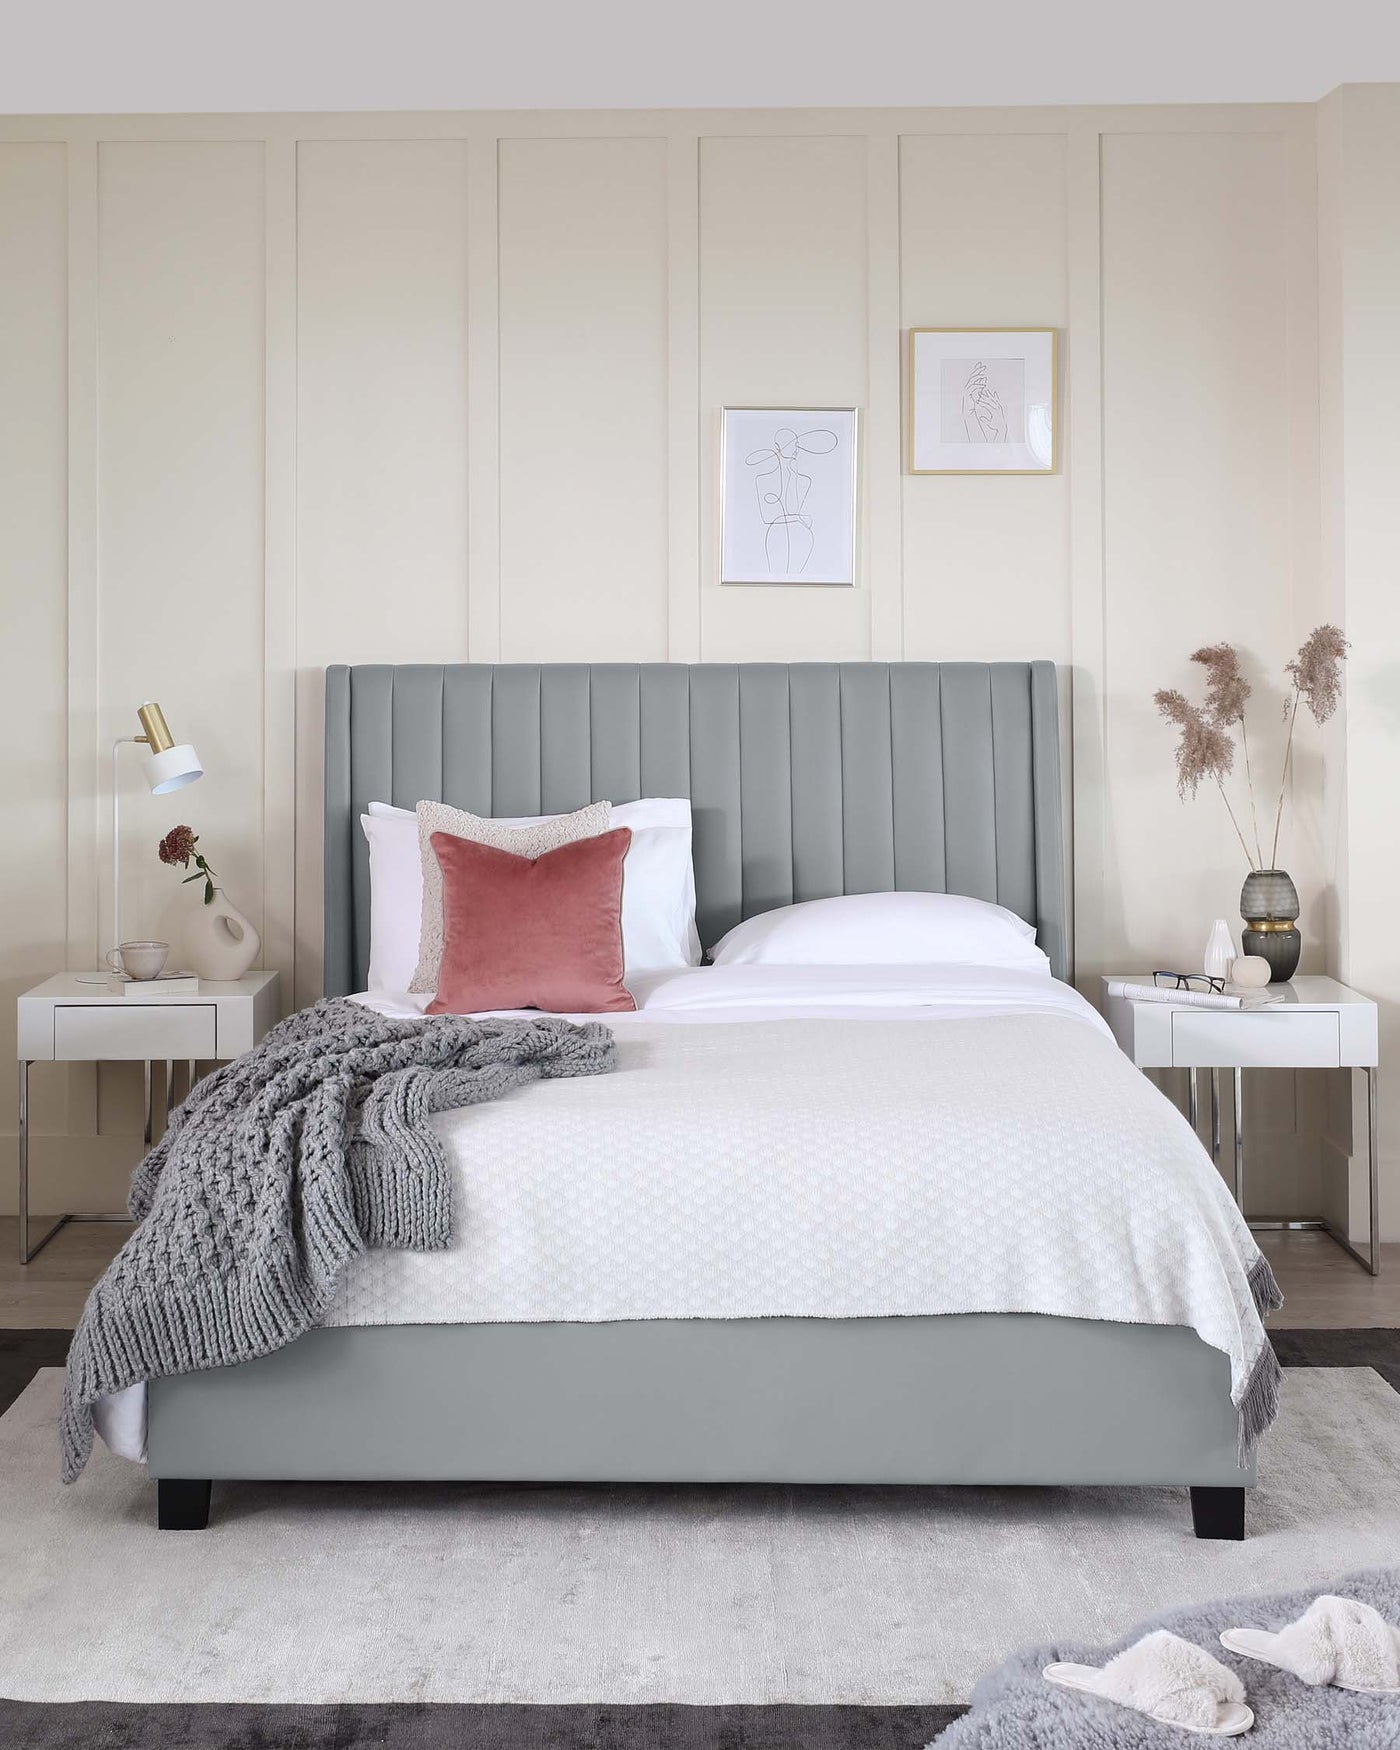 Modern bedroom furniture set featuring a large grey upholstered bed with a vertical channel tufted headboard and a white duvet. Flanking the bed are two matching white nightstands with table lamps, accessorized with decorative vases. The furniture stands on a textured grey area rug over a light wooden floor.